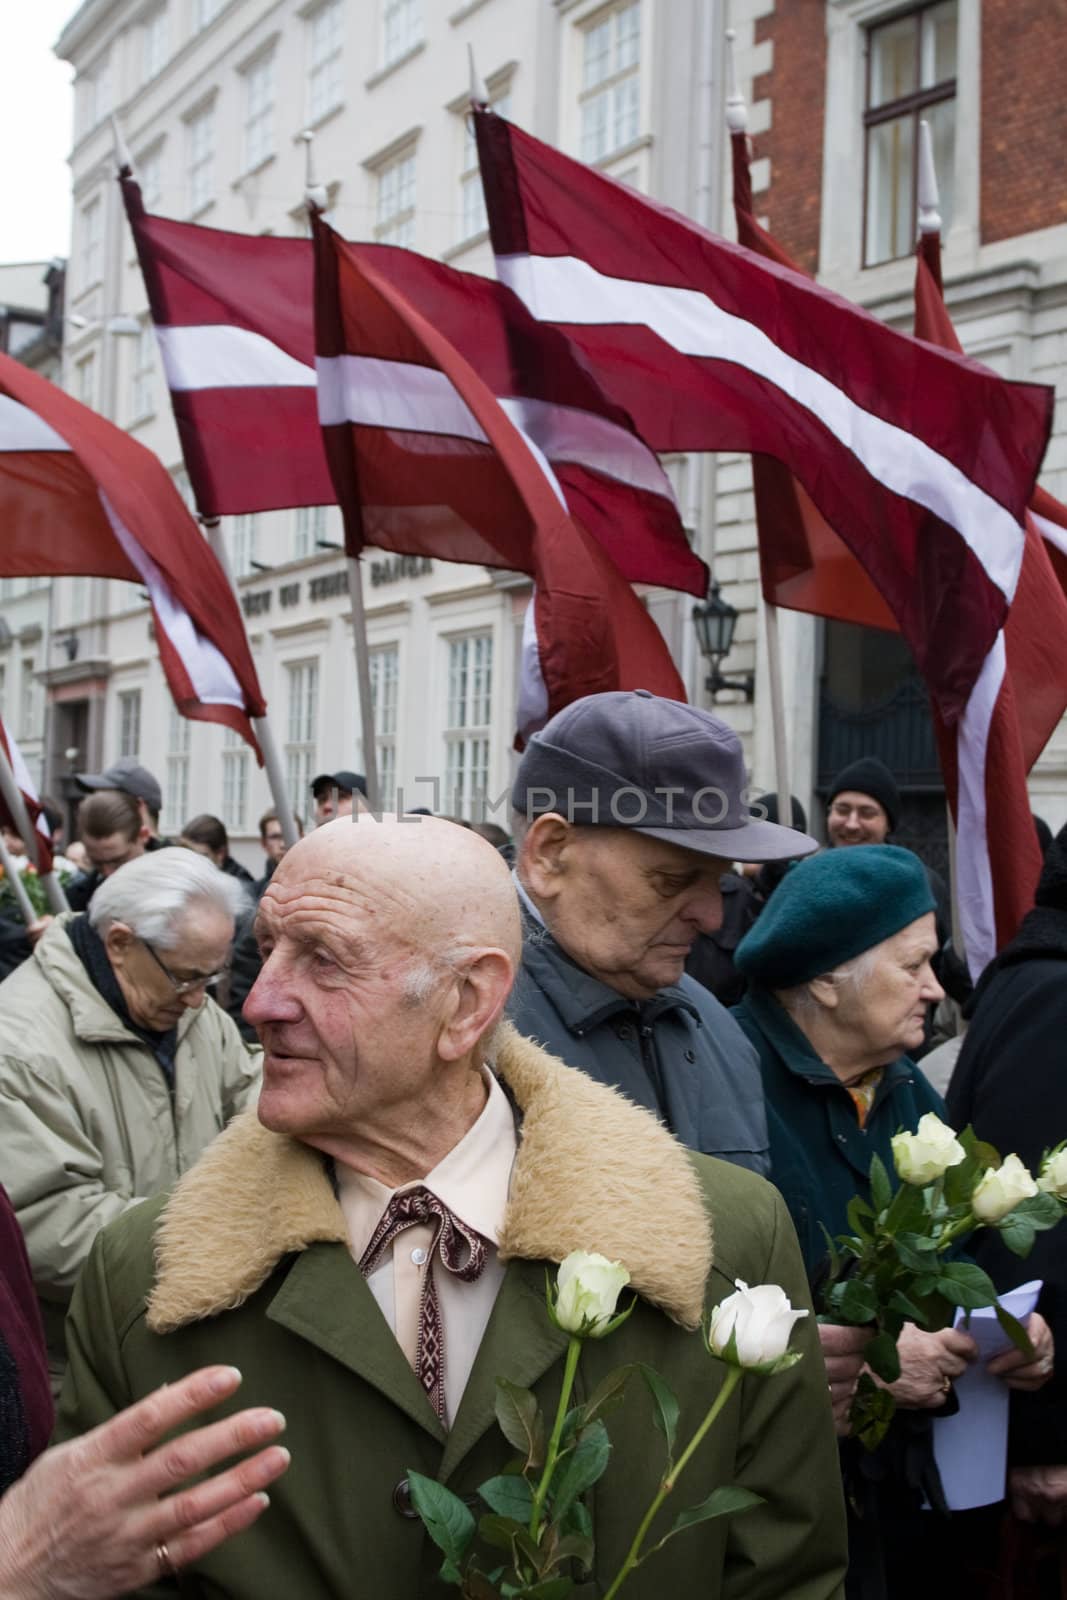 Riga, Latvia, March 16, 2009. Former veterans of the Latvian Legion and their families leaving Dome churche after service to the Freedom monument. Commemoration of the Latvian Waffen SS unit or Legionnaires is always drawing crowds of nationalist supporters and anti-fascists. Many Latvians legionnaires were forcibly called to join the Latvian SS Legion.